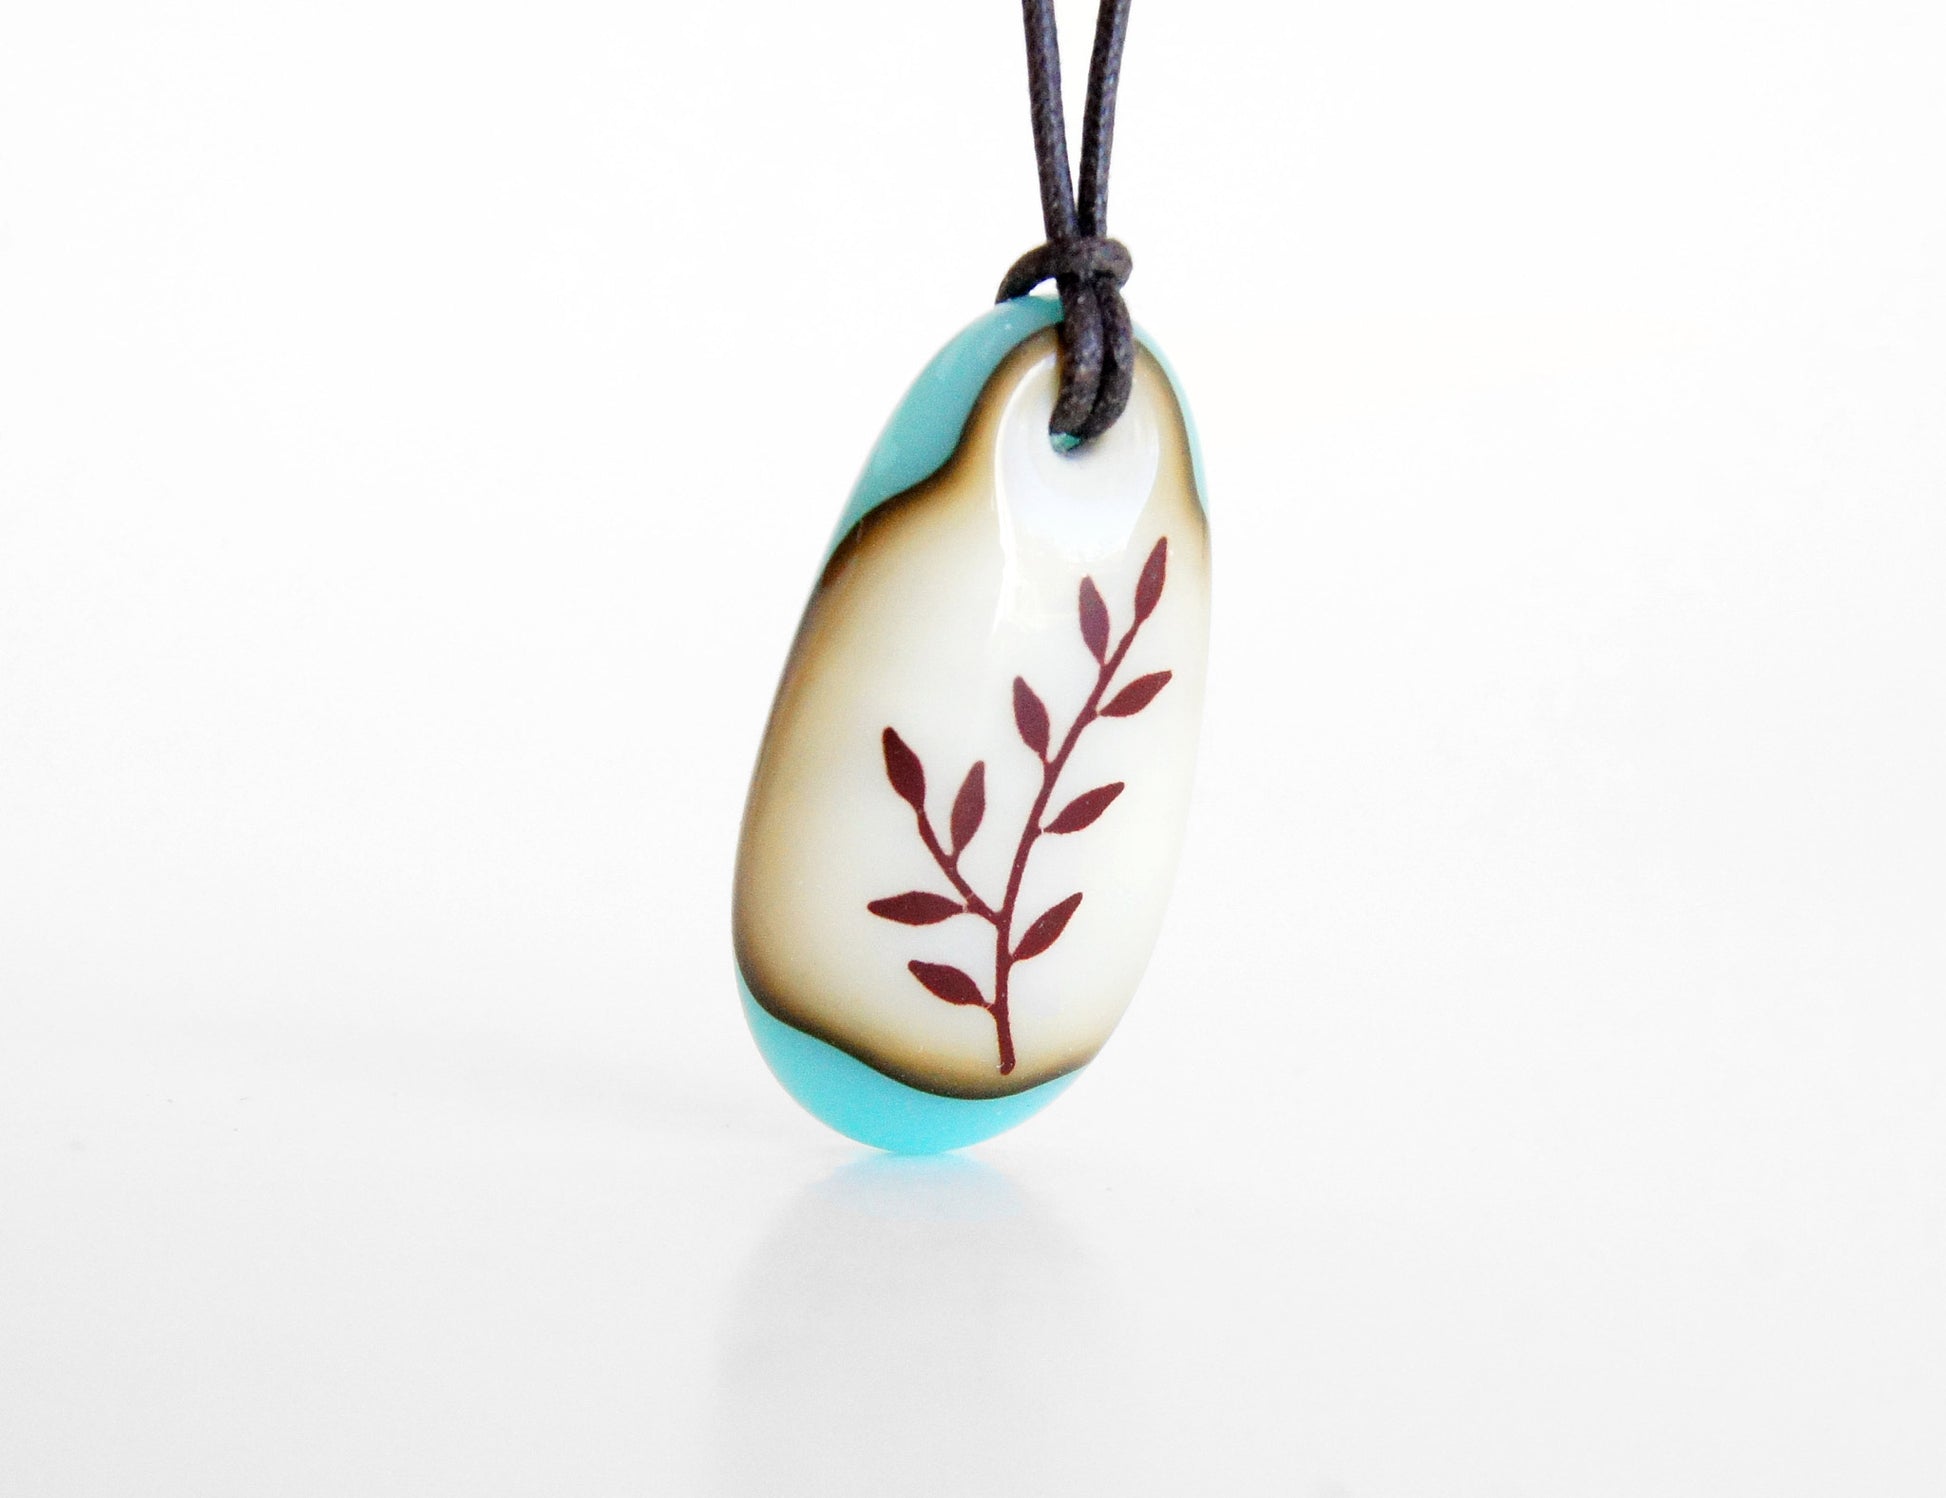 Botanical necklace with delicate leaf image. 